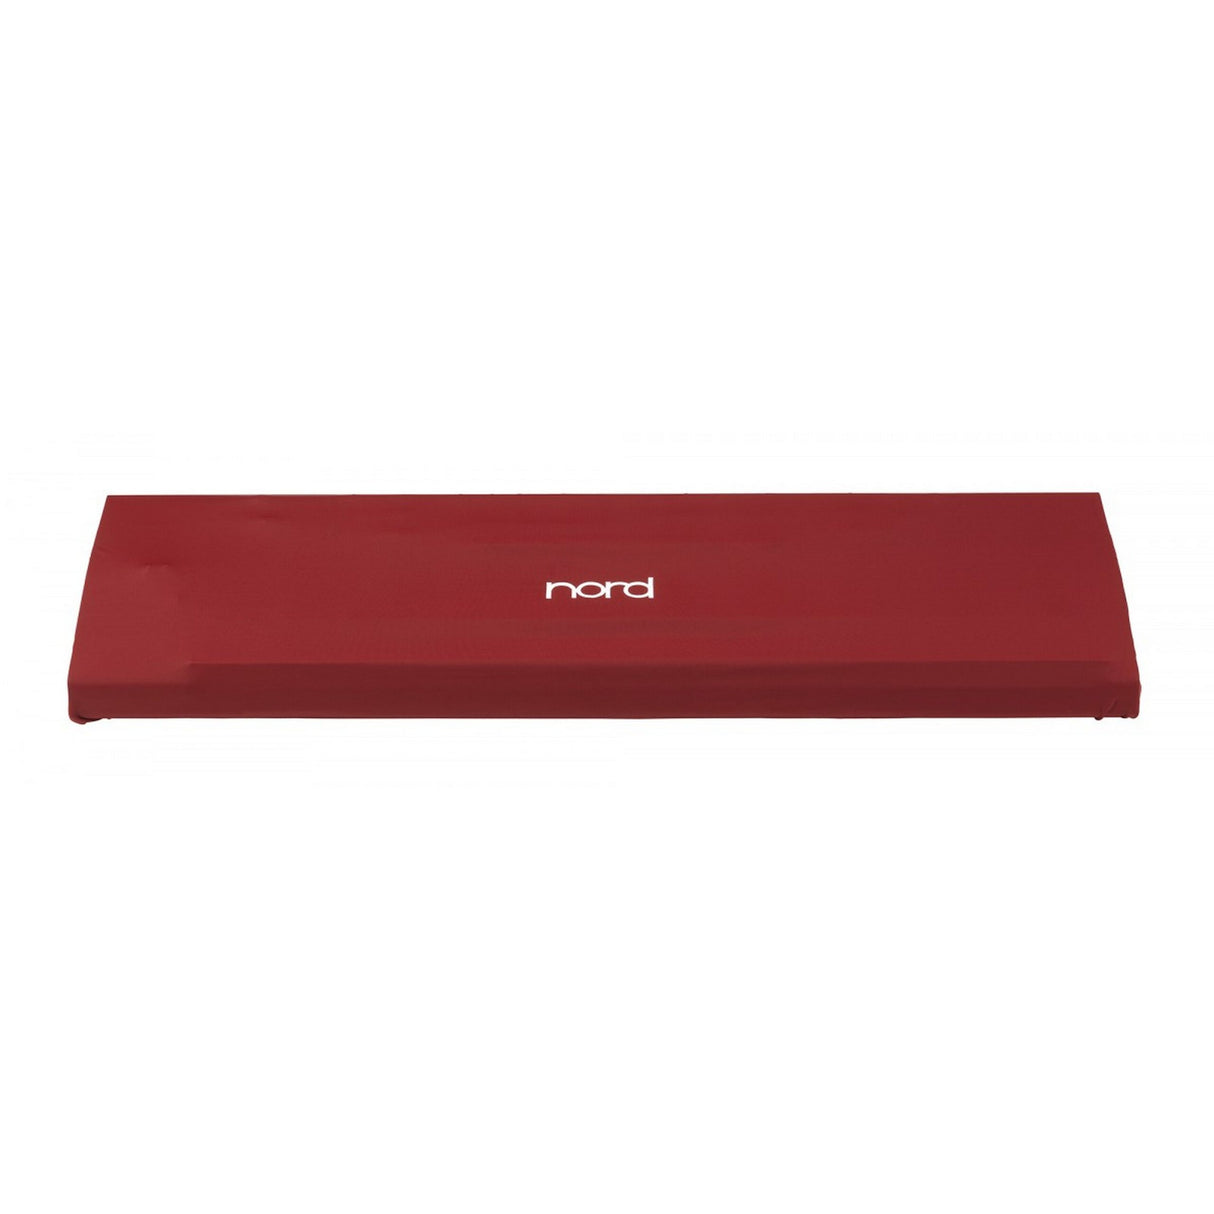 Nord DC76V2 Dust Cover for Stage 2 HA76, Piano 2 HA76